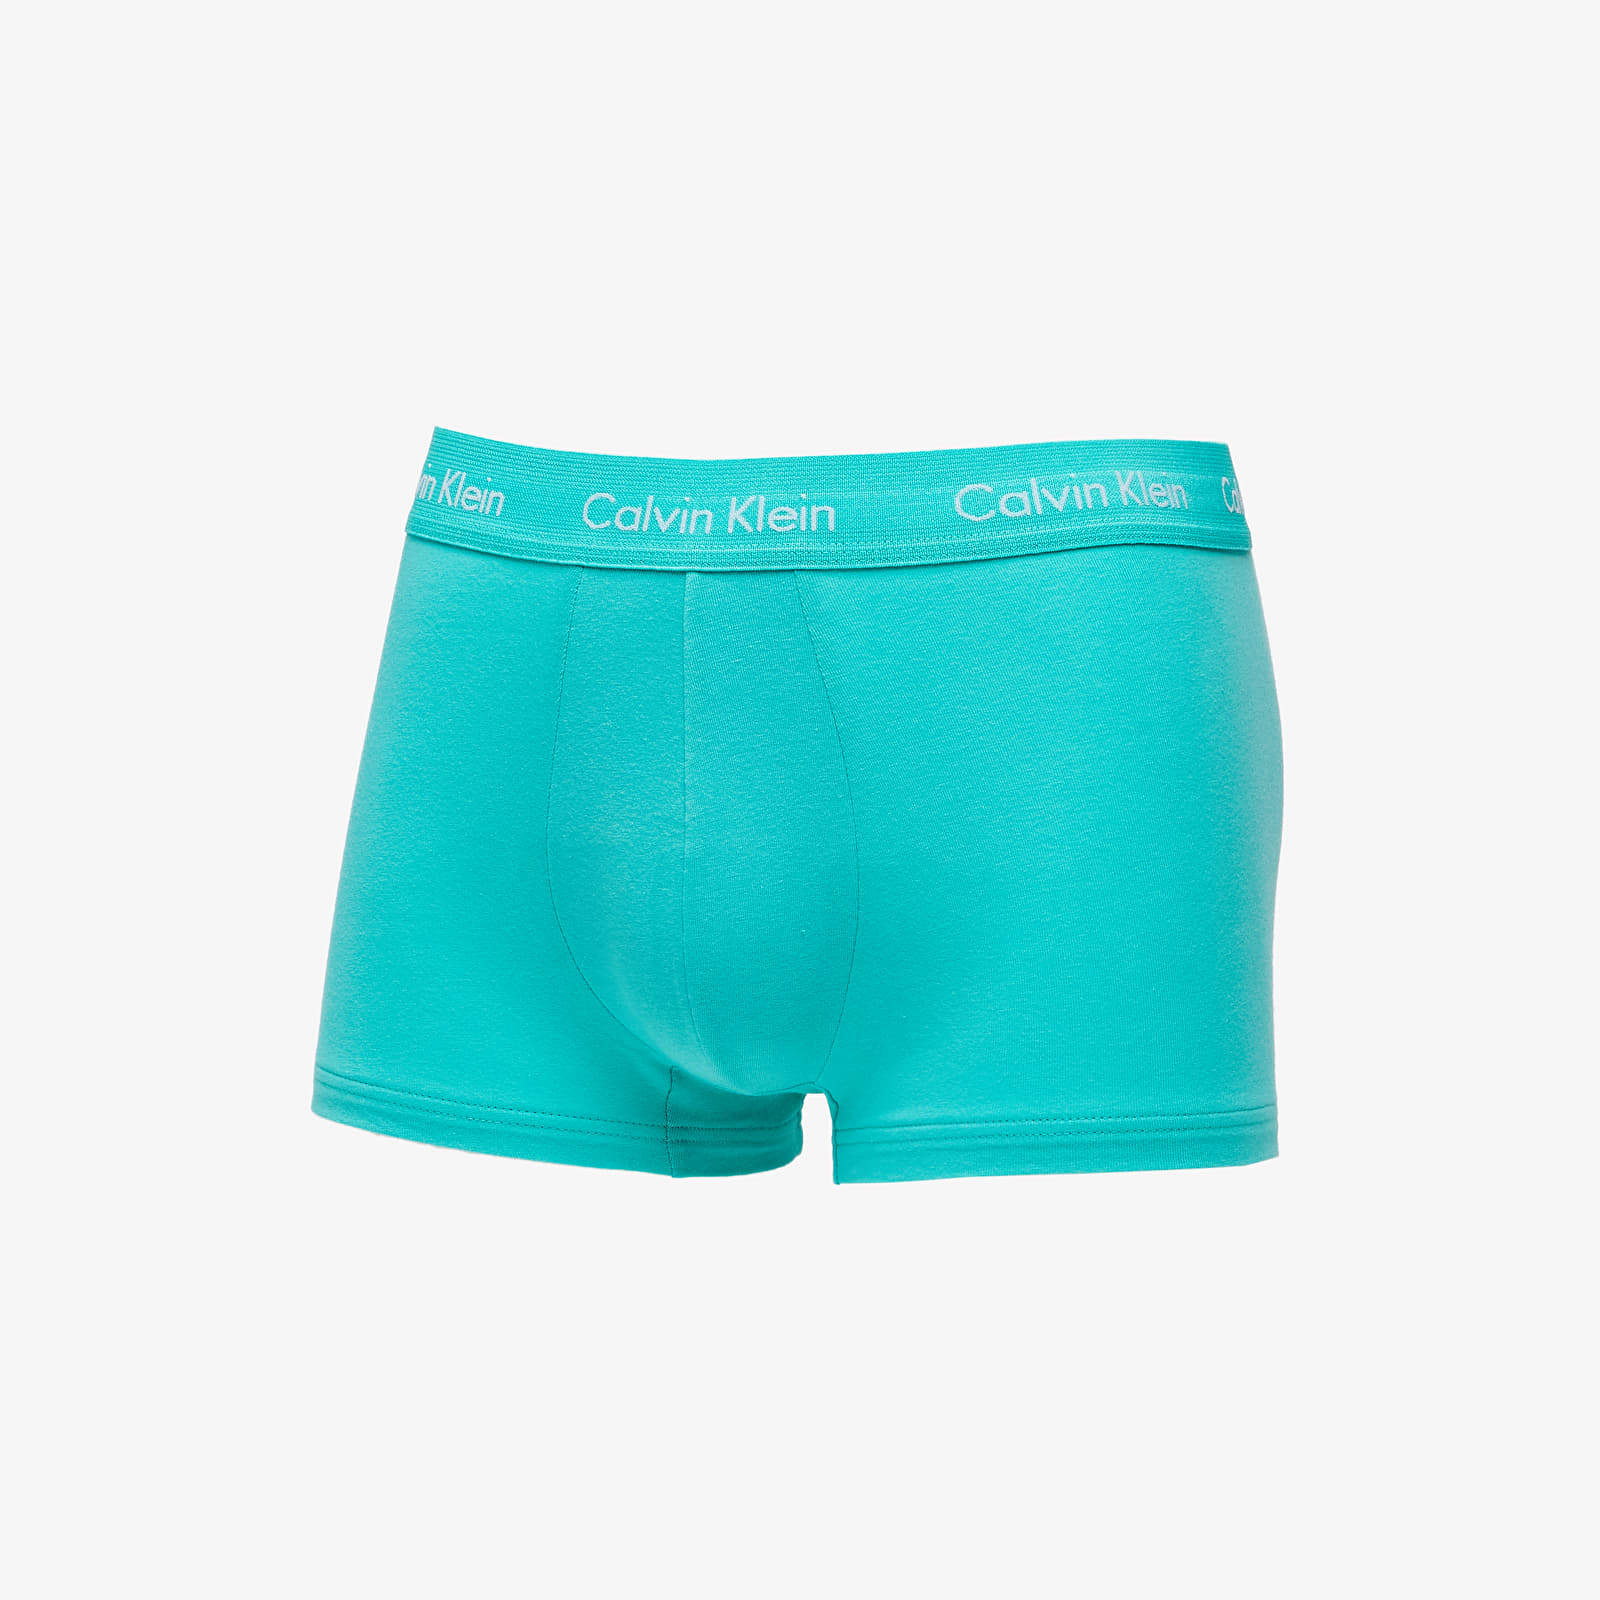 Boxer shorts Calvin Klein The Pride Edit Low Rise Trunk 5 Pack 